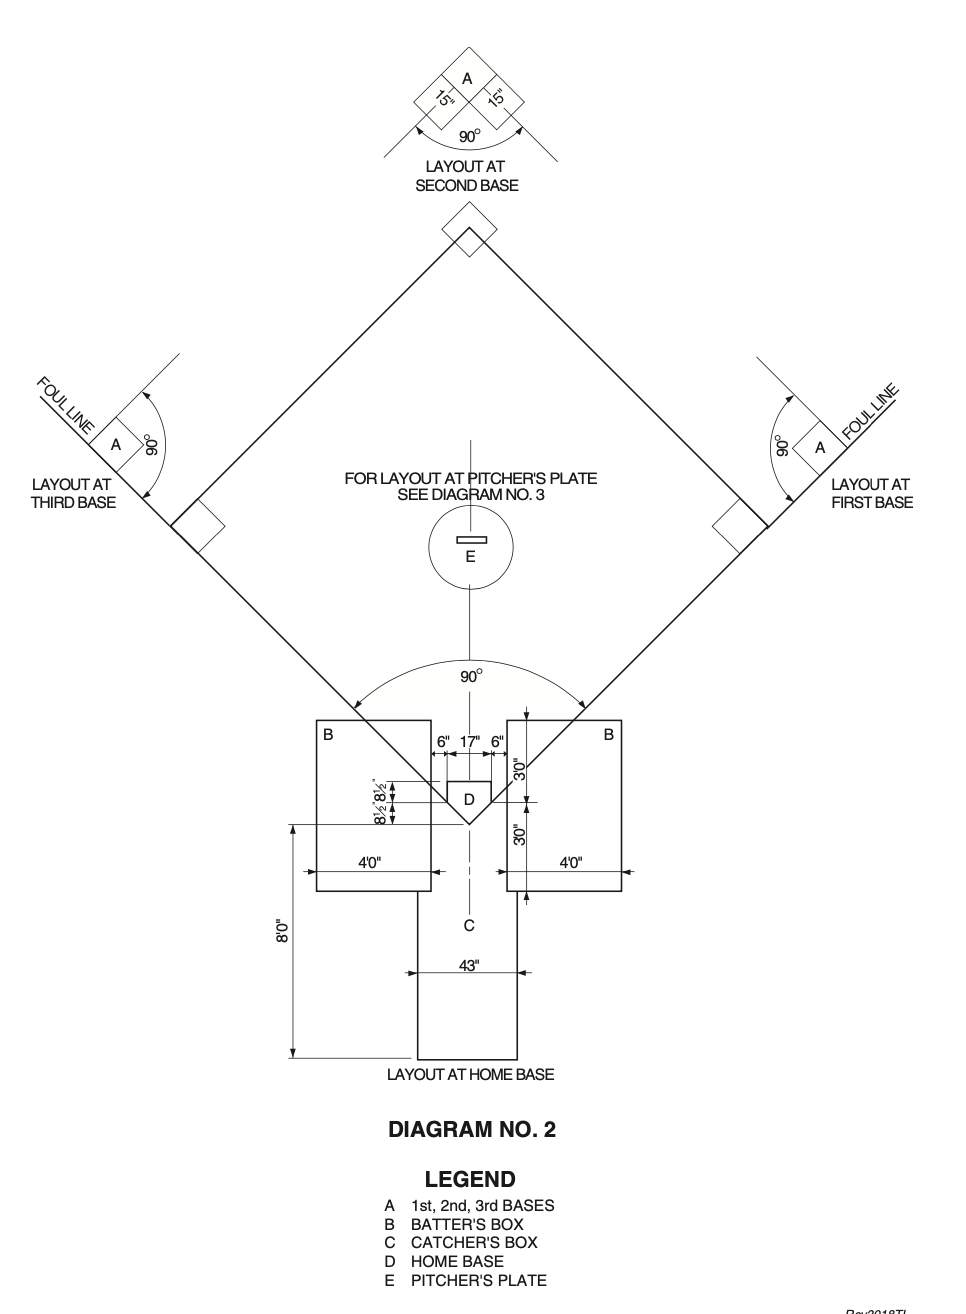 MLB Official Baseball Rules, Annotated The Playing Field (Part 2